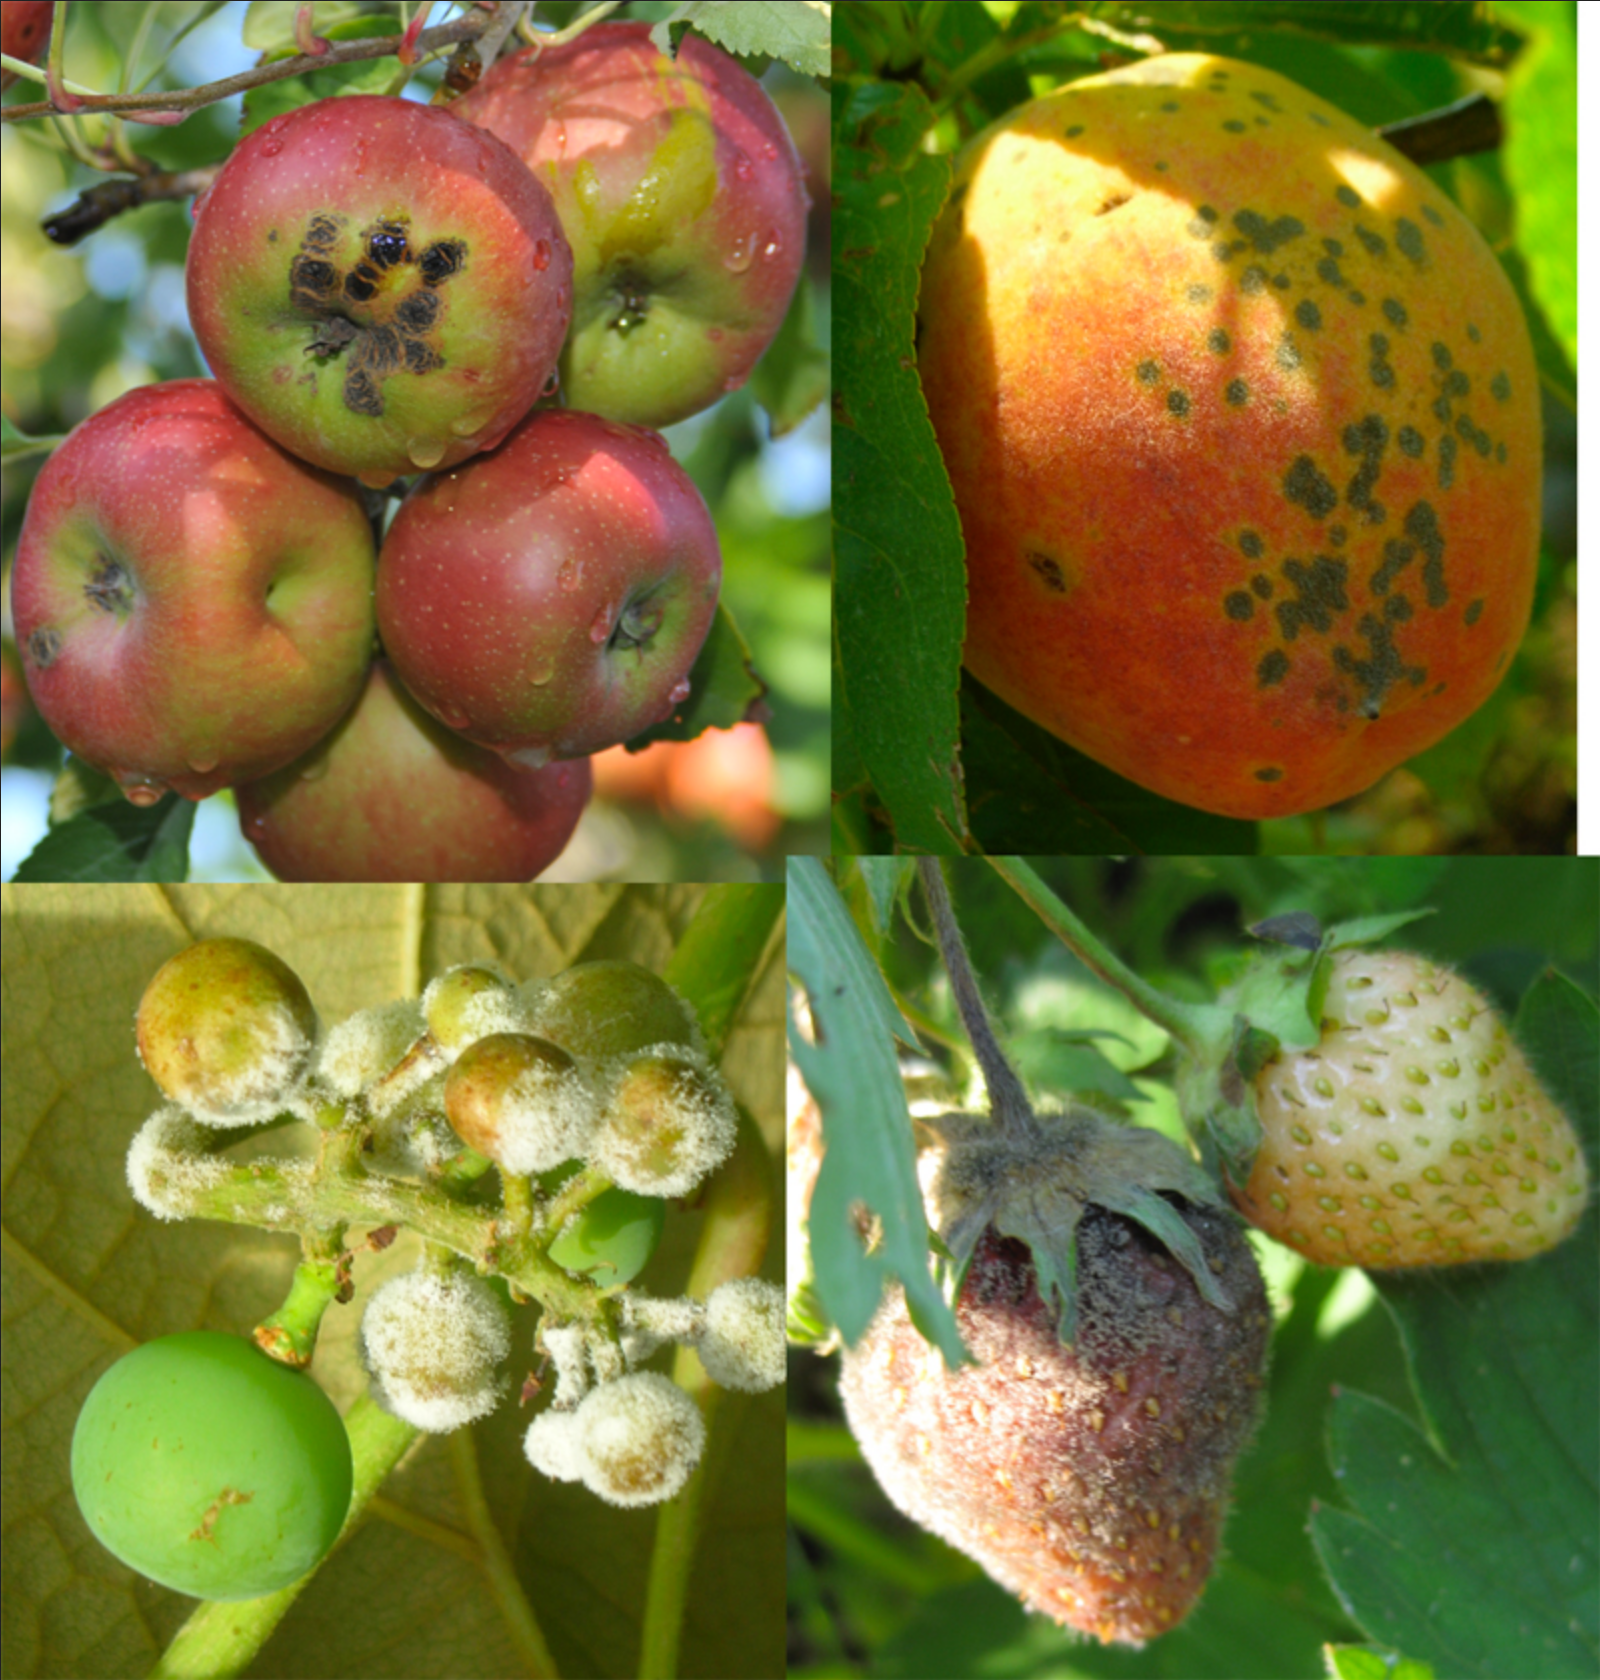 fruit crops are impacted by different pathogens